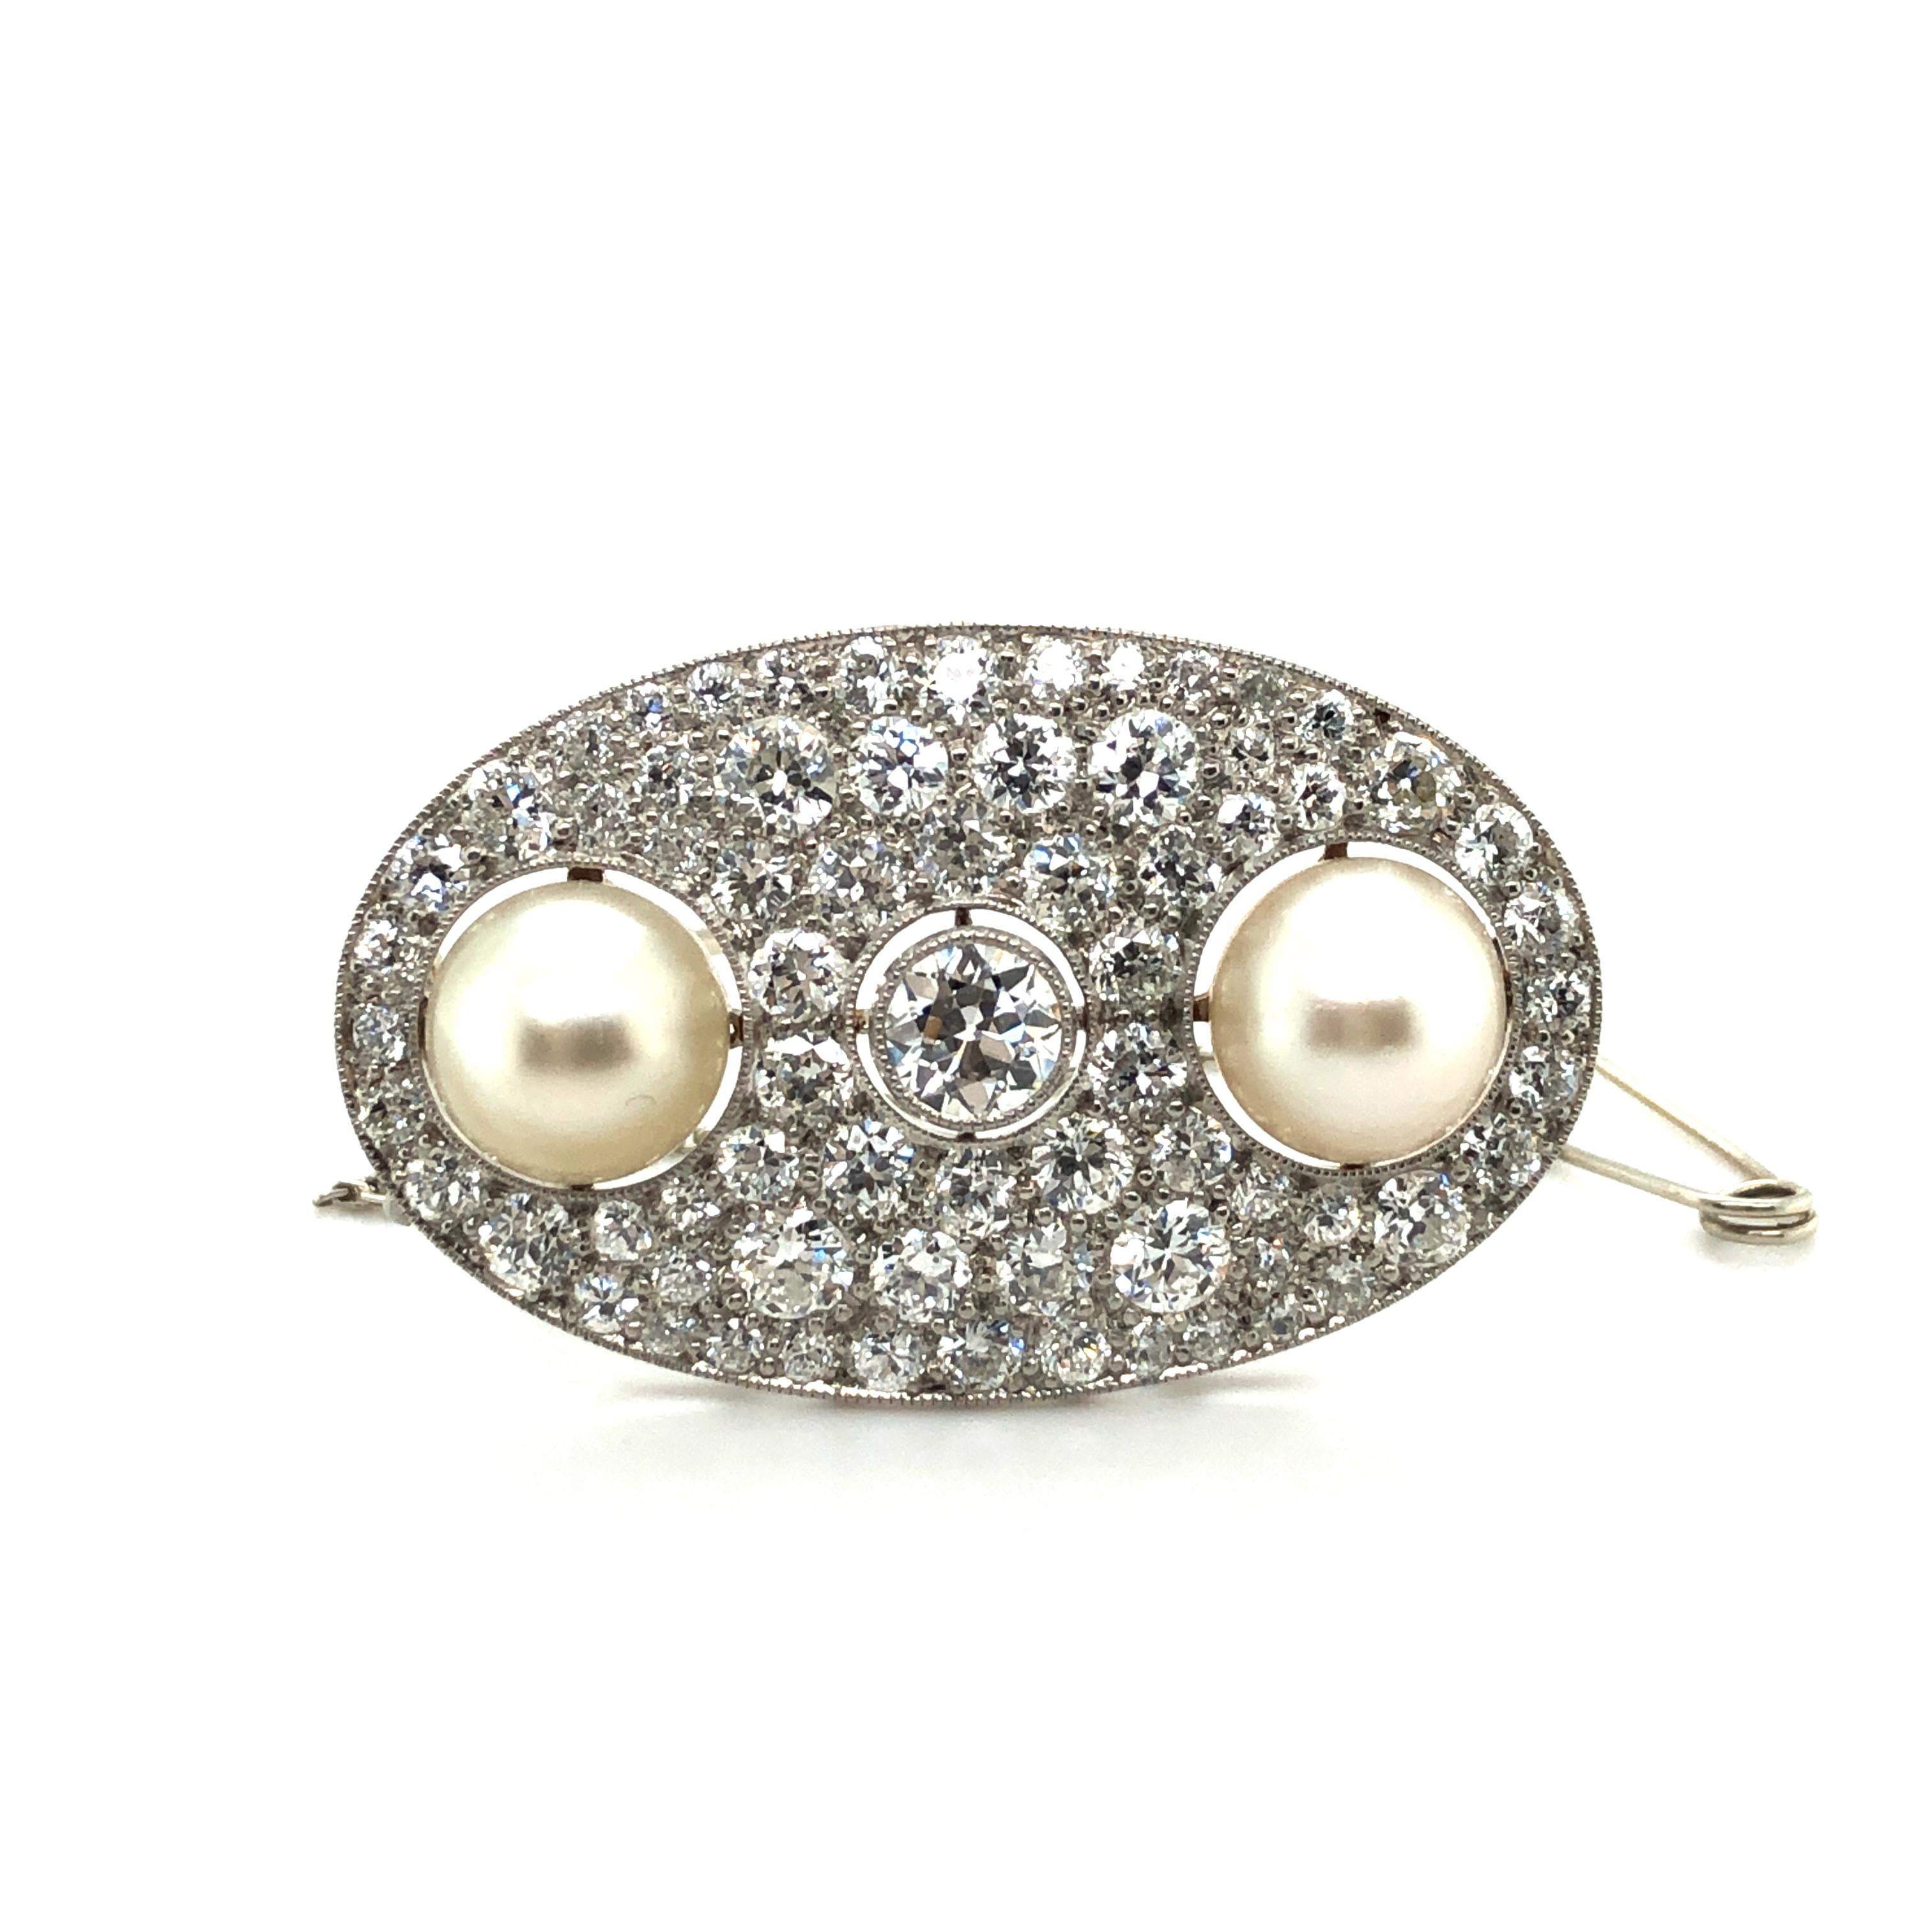 Gorgeous oval shaped Art Déco brooch in exquisite condition.

Center set in a fine mille griffe with a 0.60 ct old European-cut diamond of G/H-vs quality. Flanked by two slightly button-shaped natural saltwater pearls of 9 mm in diameter. The SSEF